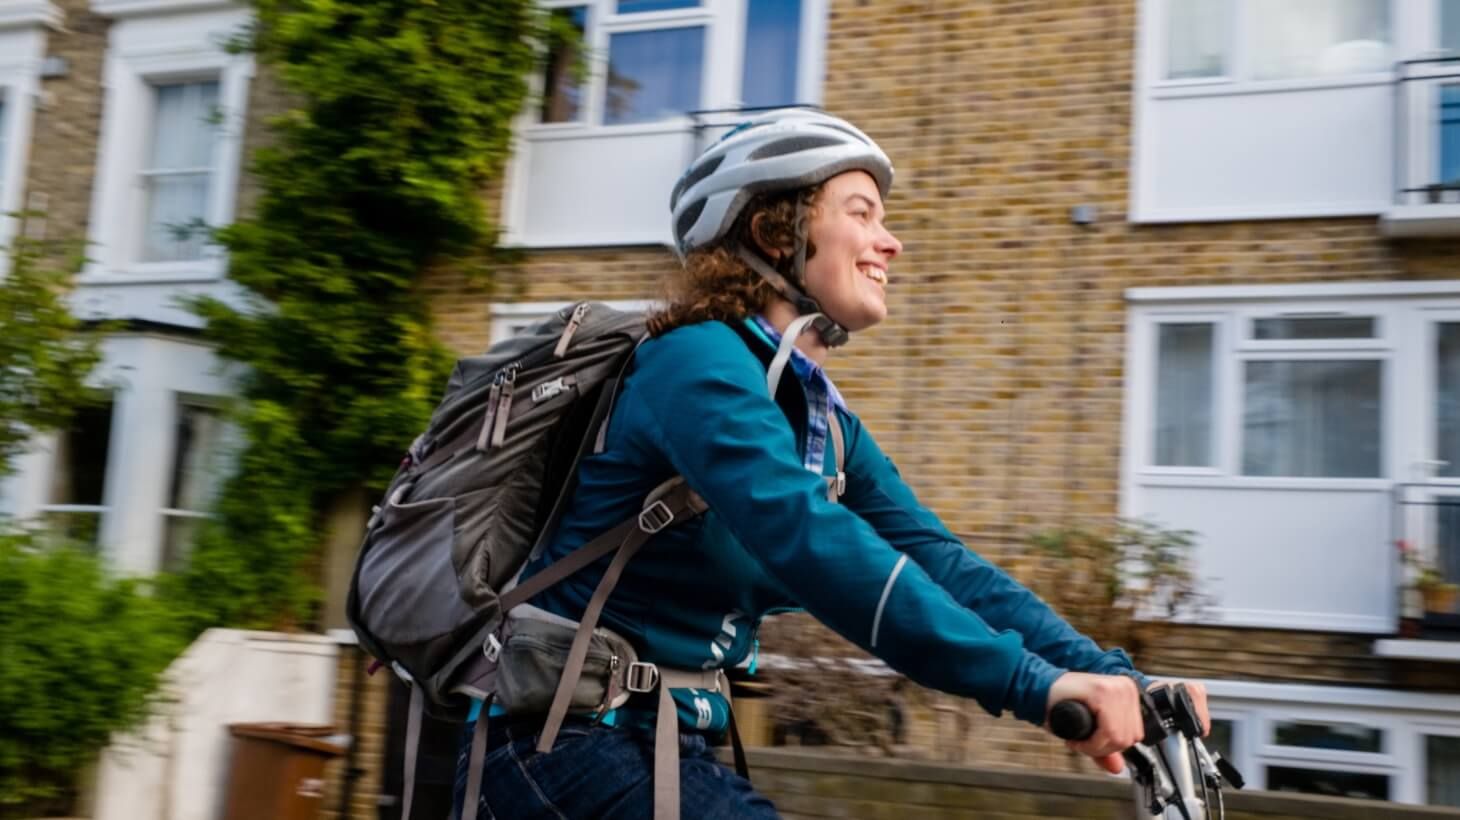 active travel england planning toolkit